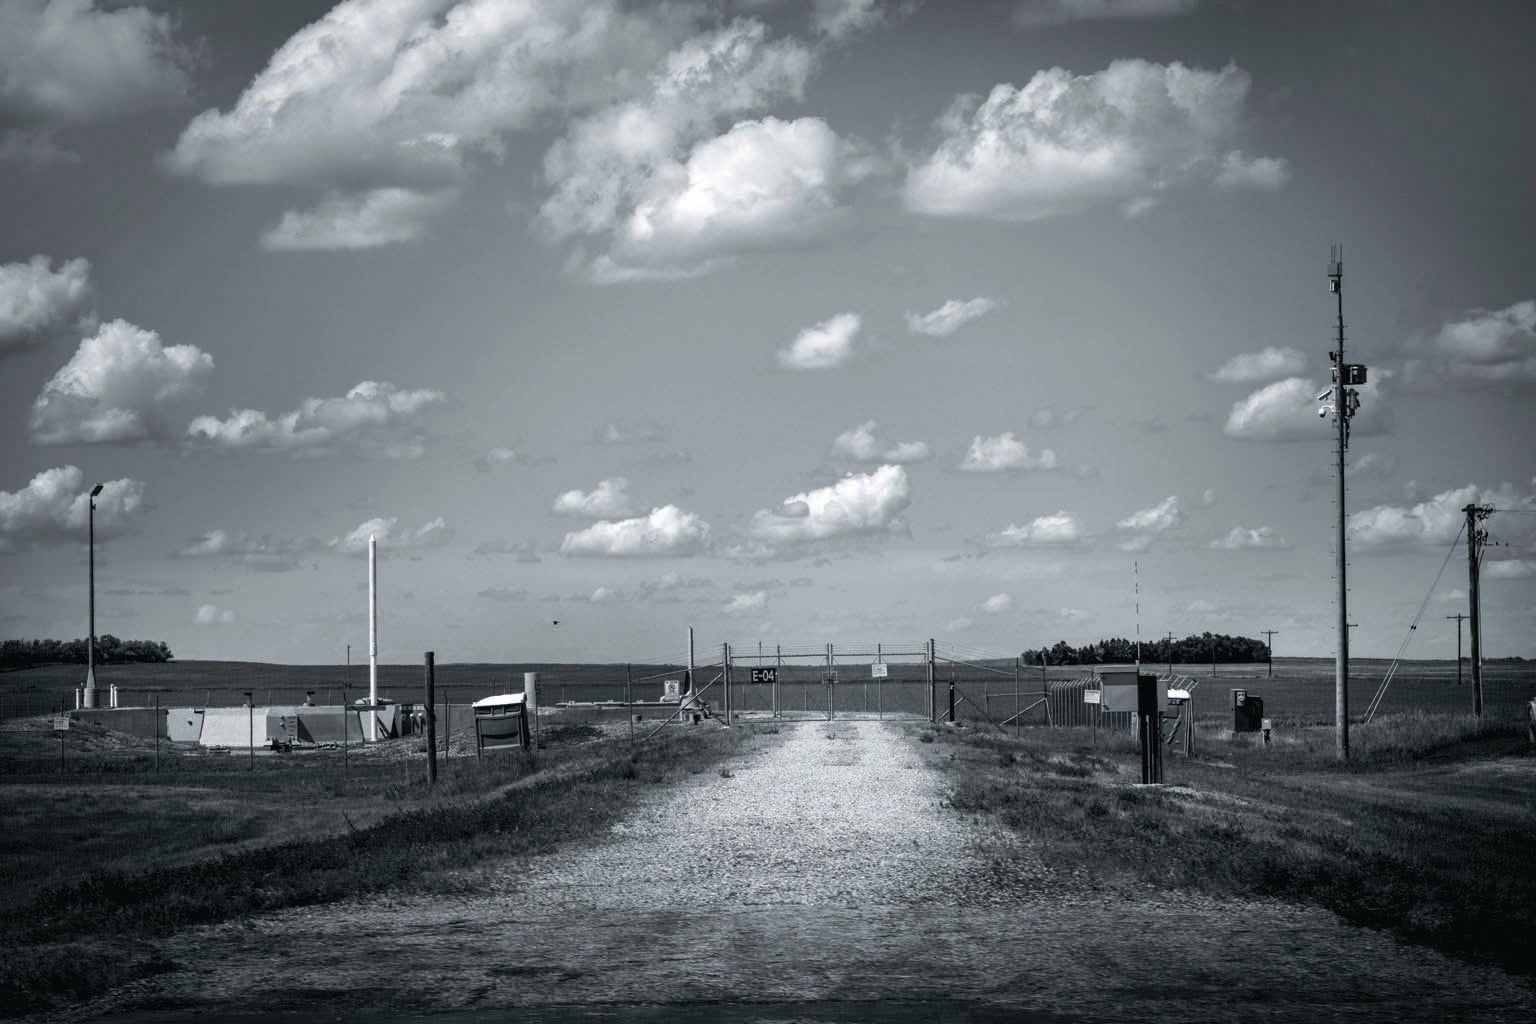 Black and white photograph showing a remote area with dirt road and metal gate.